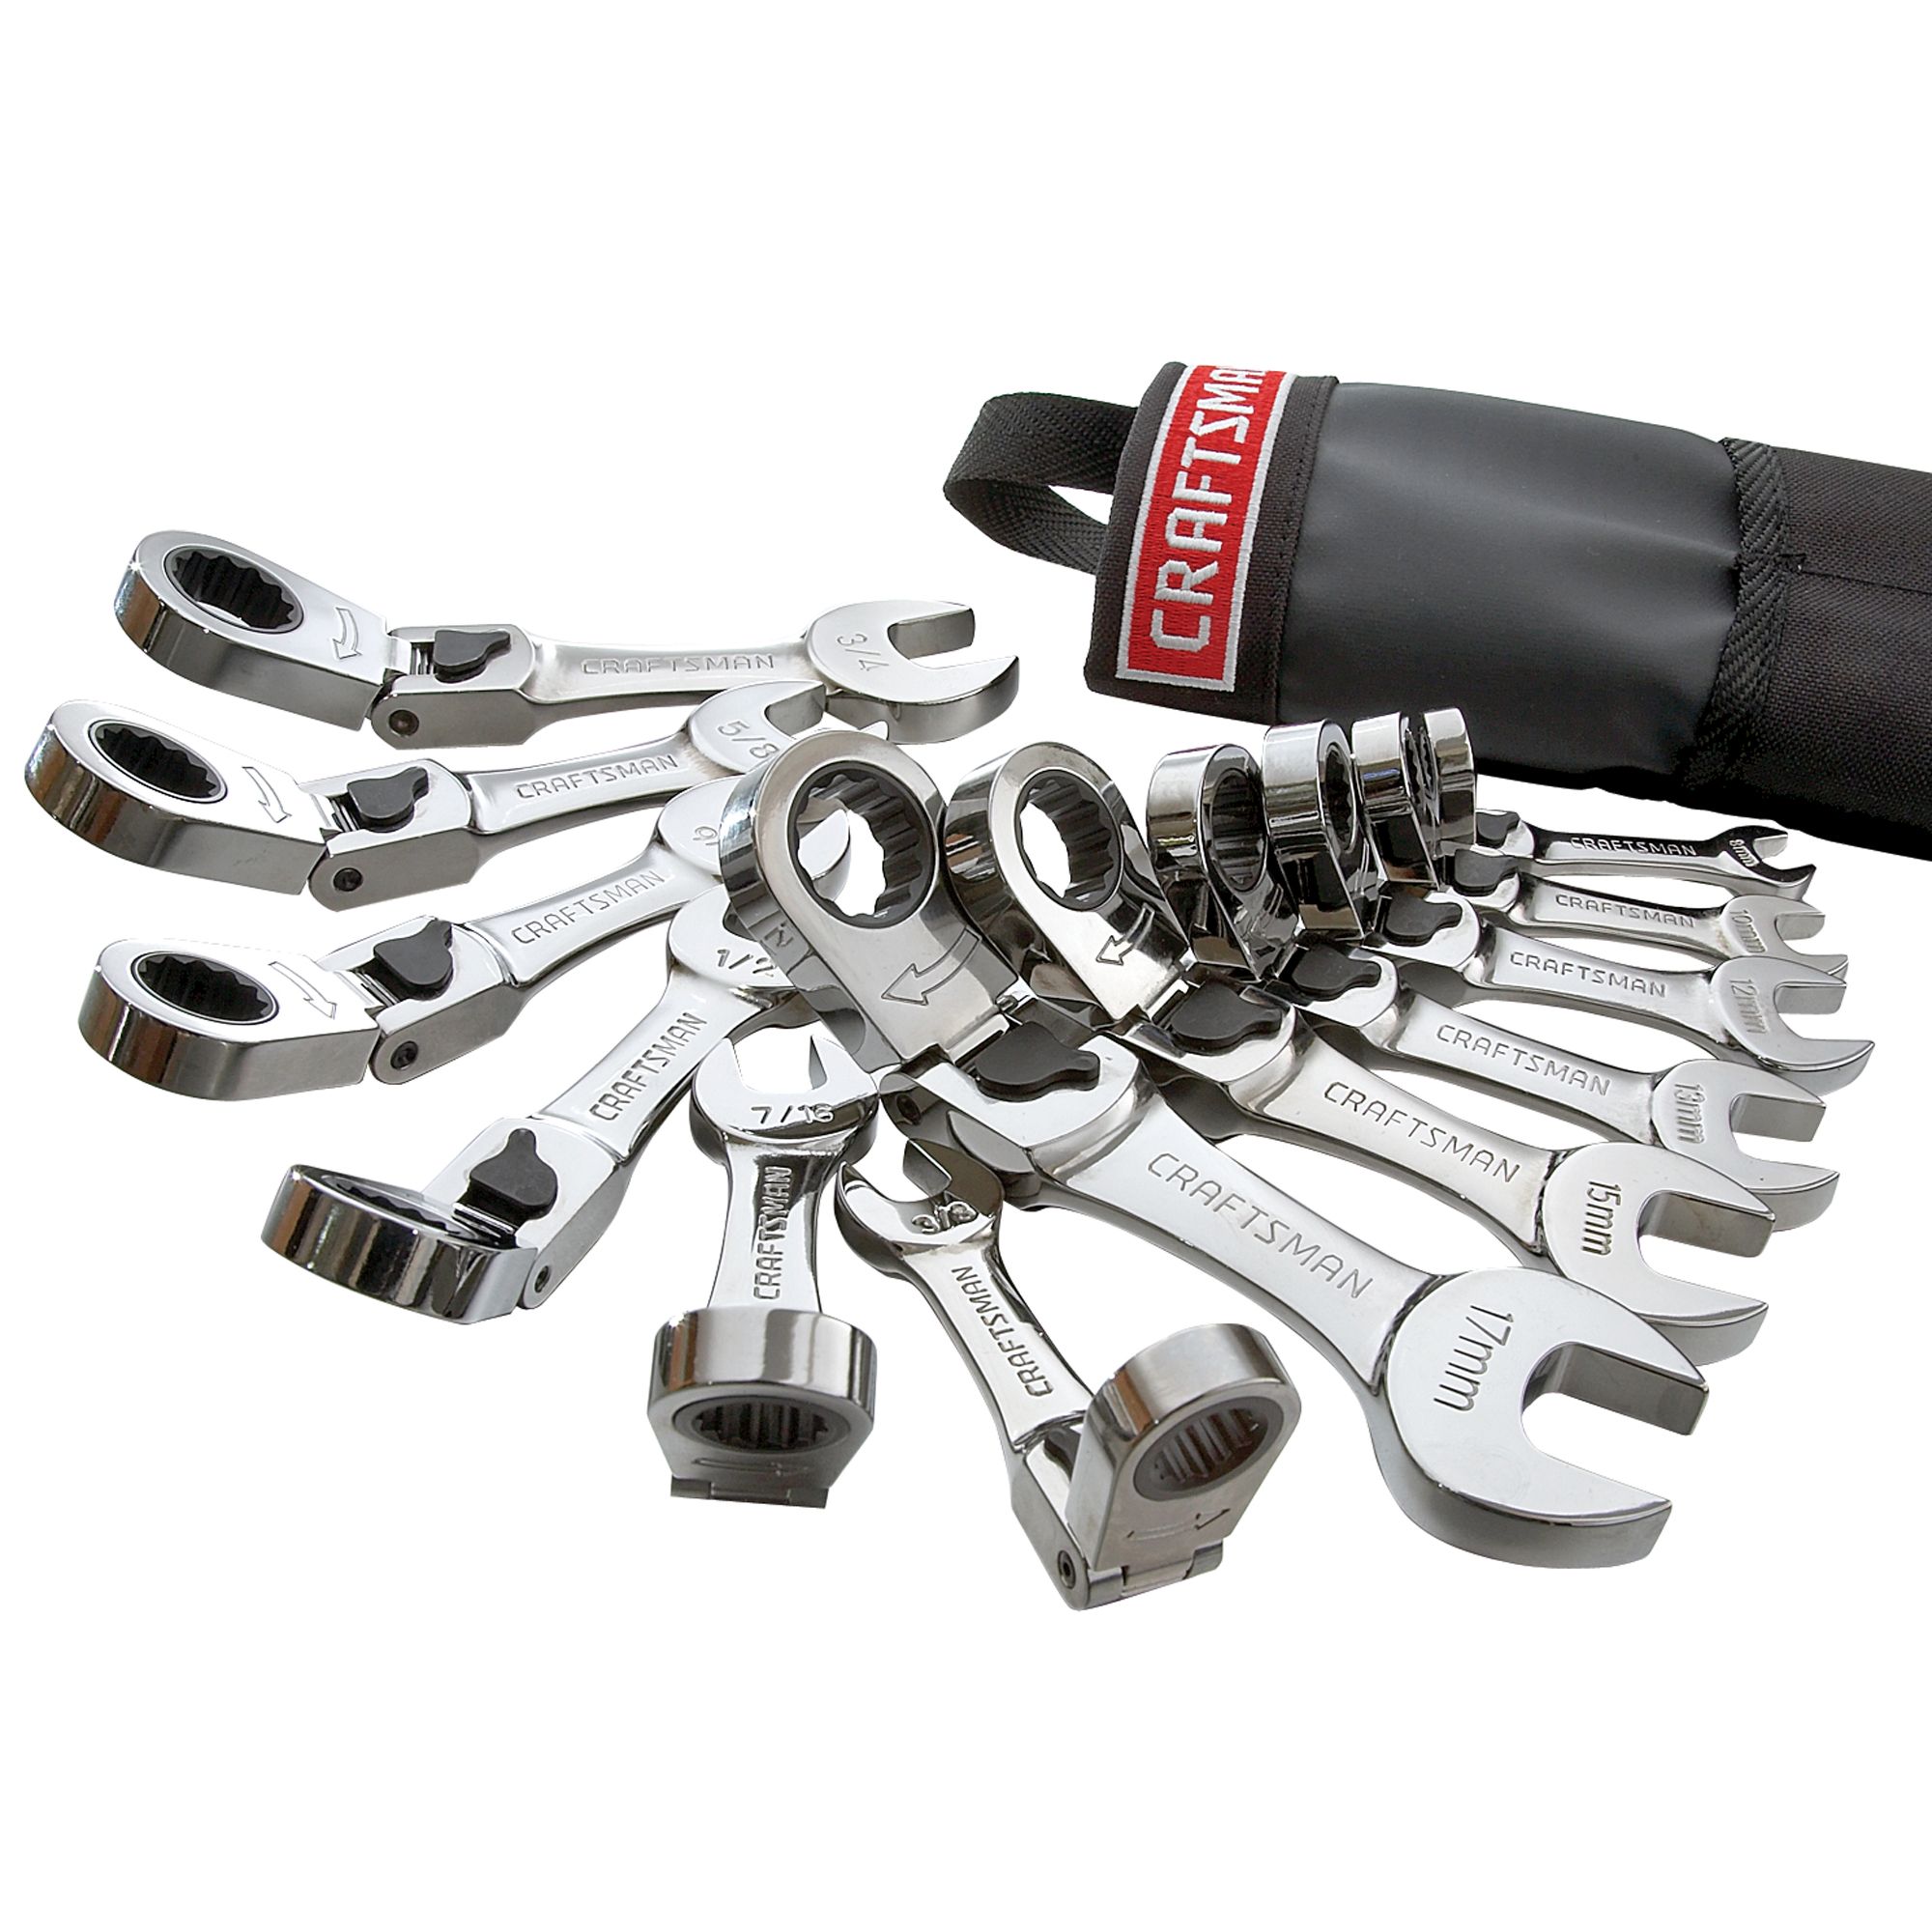 Craftsman 12 pc. Full Polish Stubby Locking Flex Ratcheting Wrenches w/ Deluxe Roll Pouch